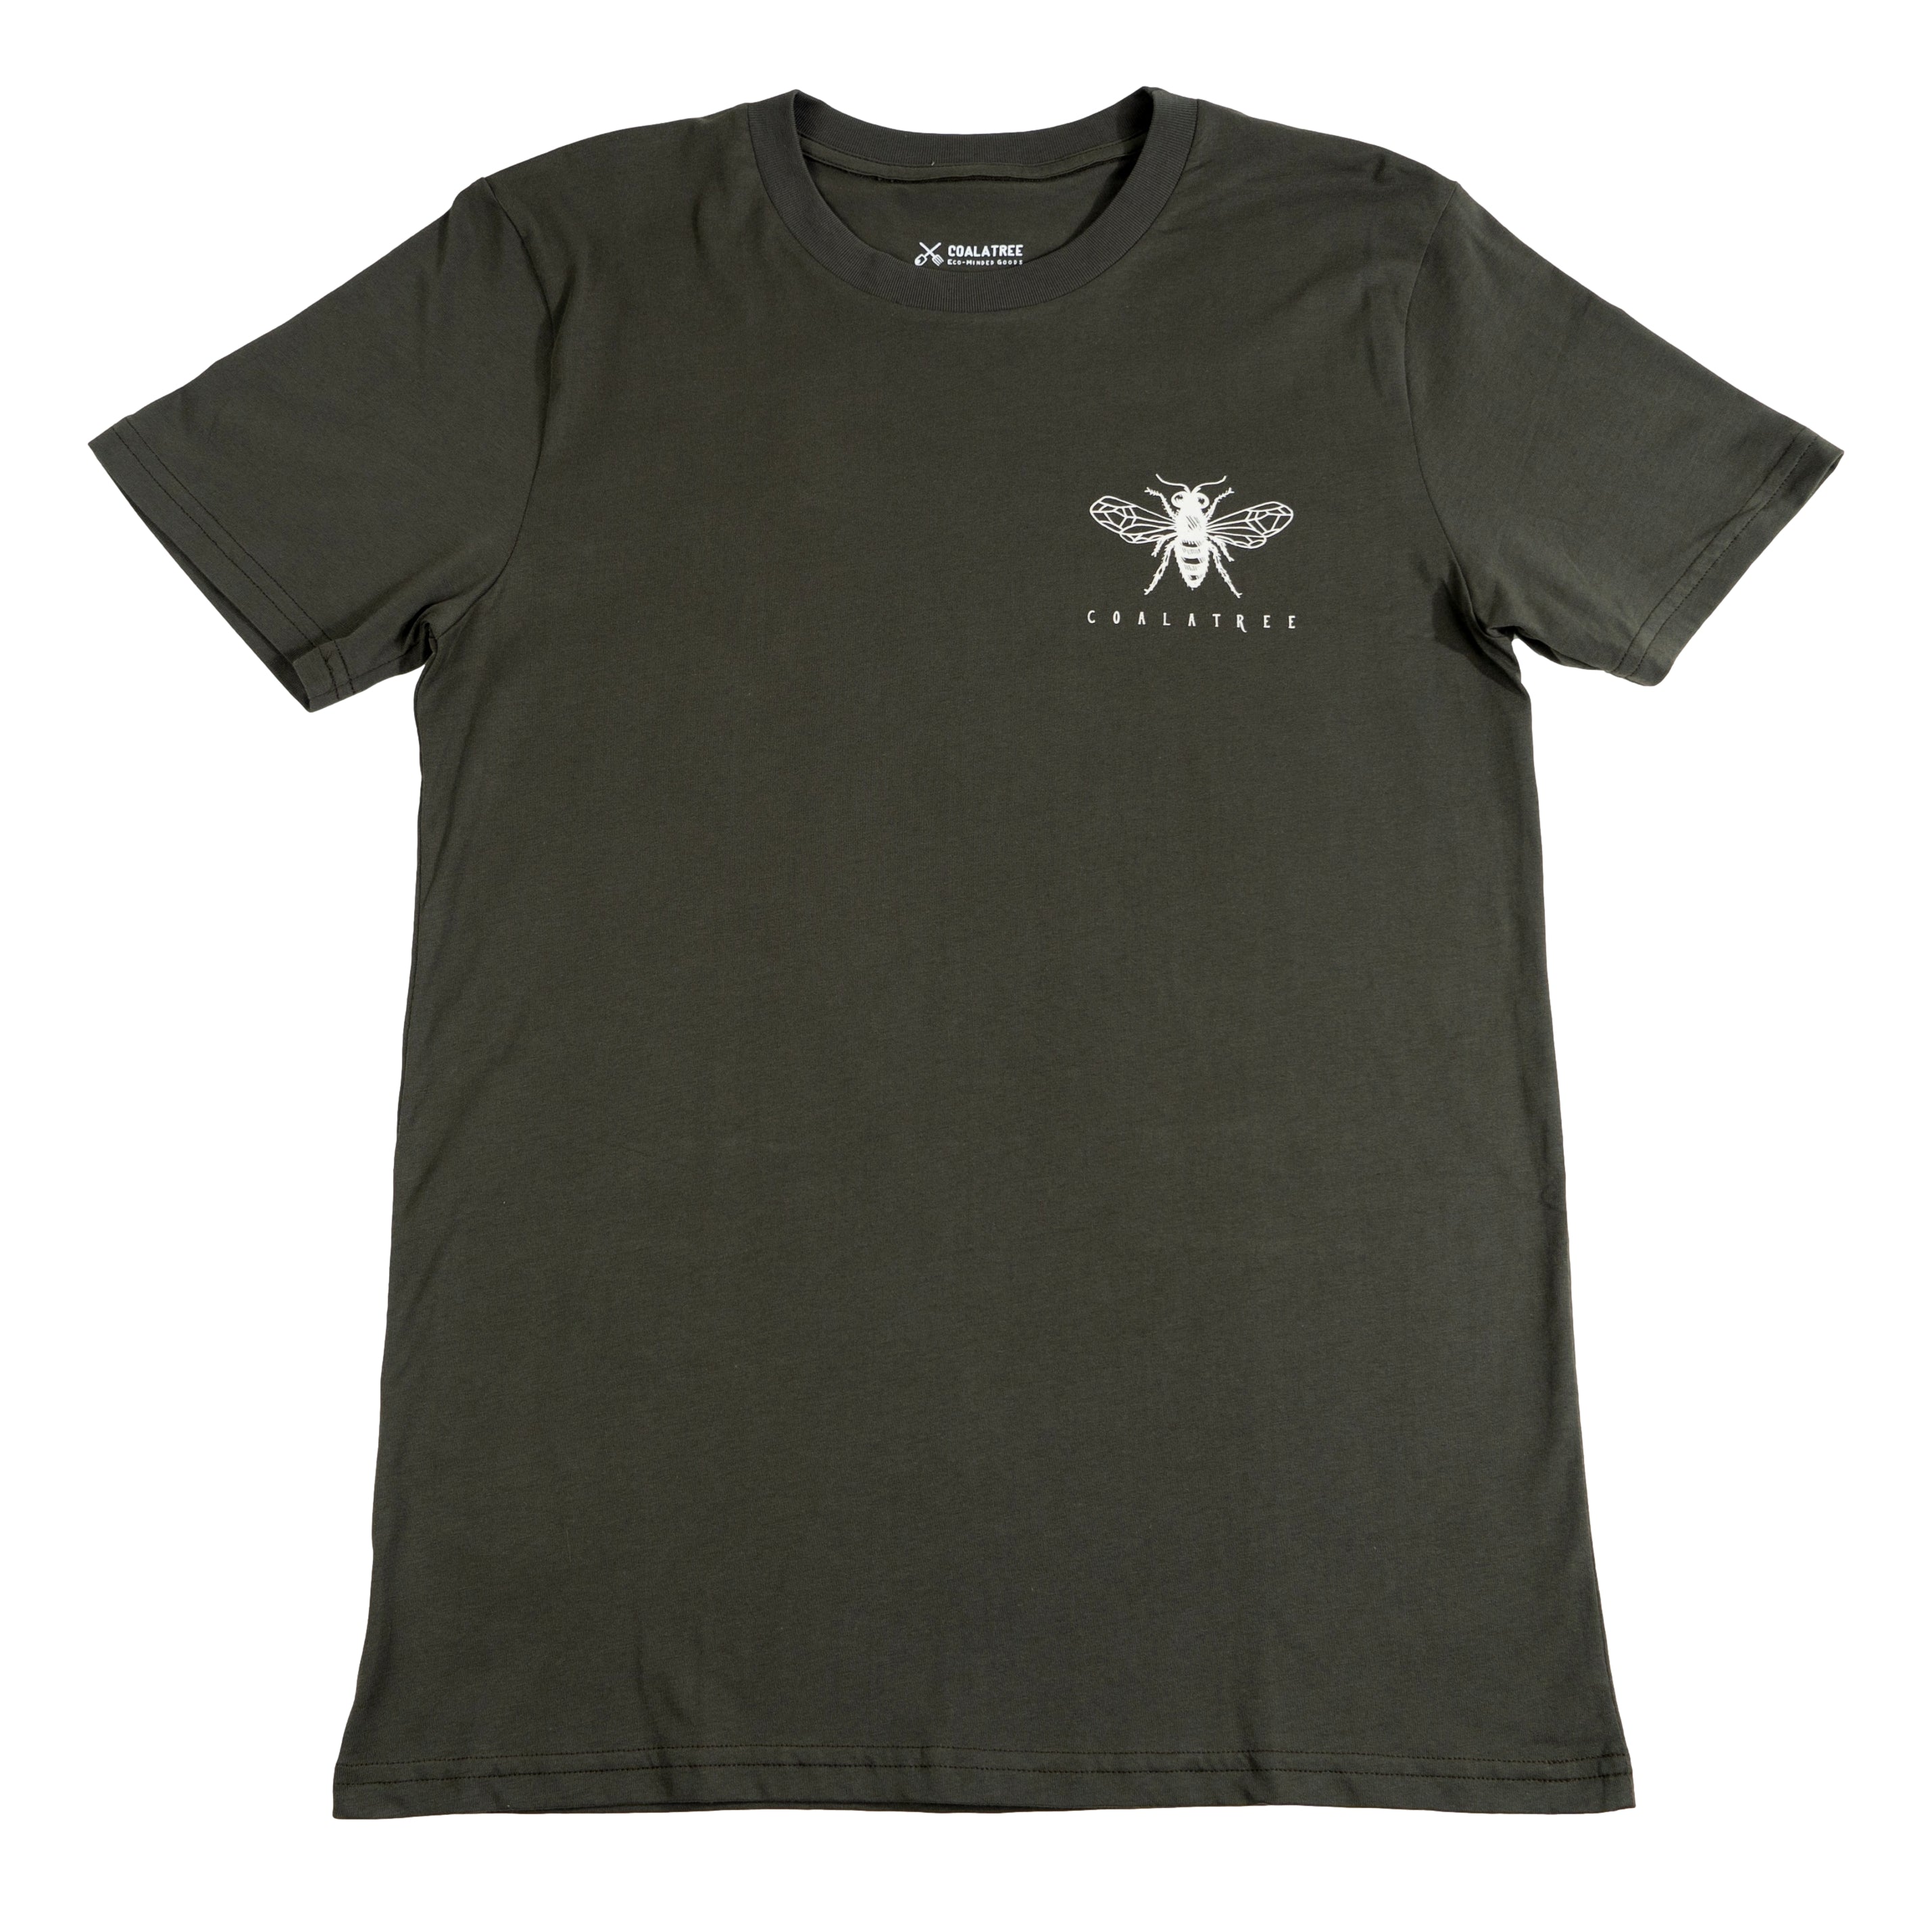 Save the bees cotton tee - charcoal